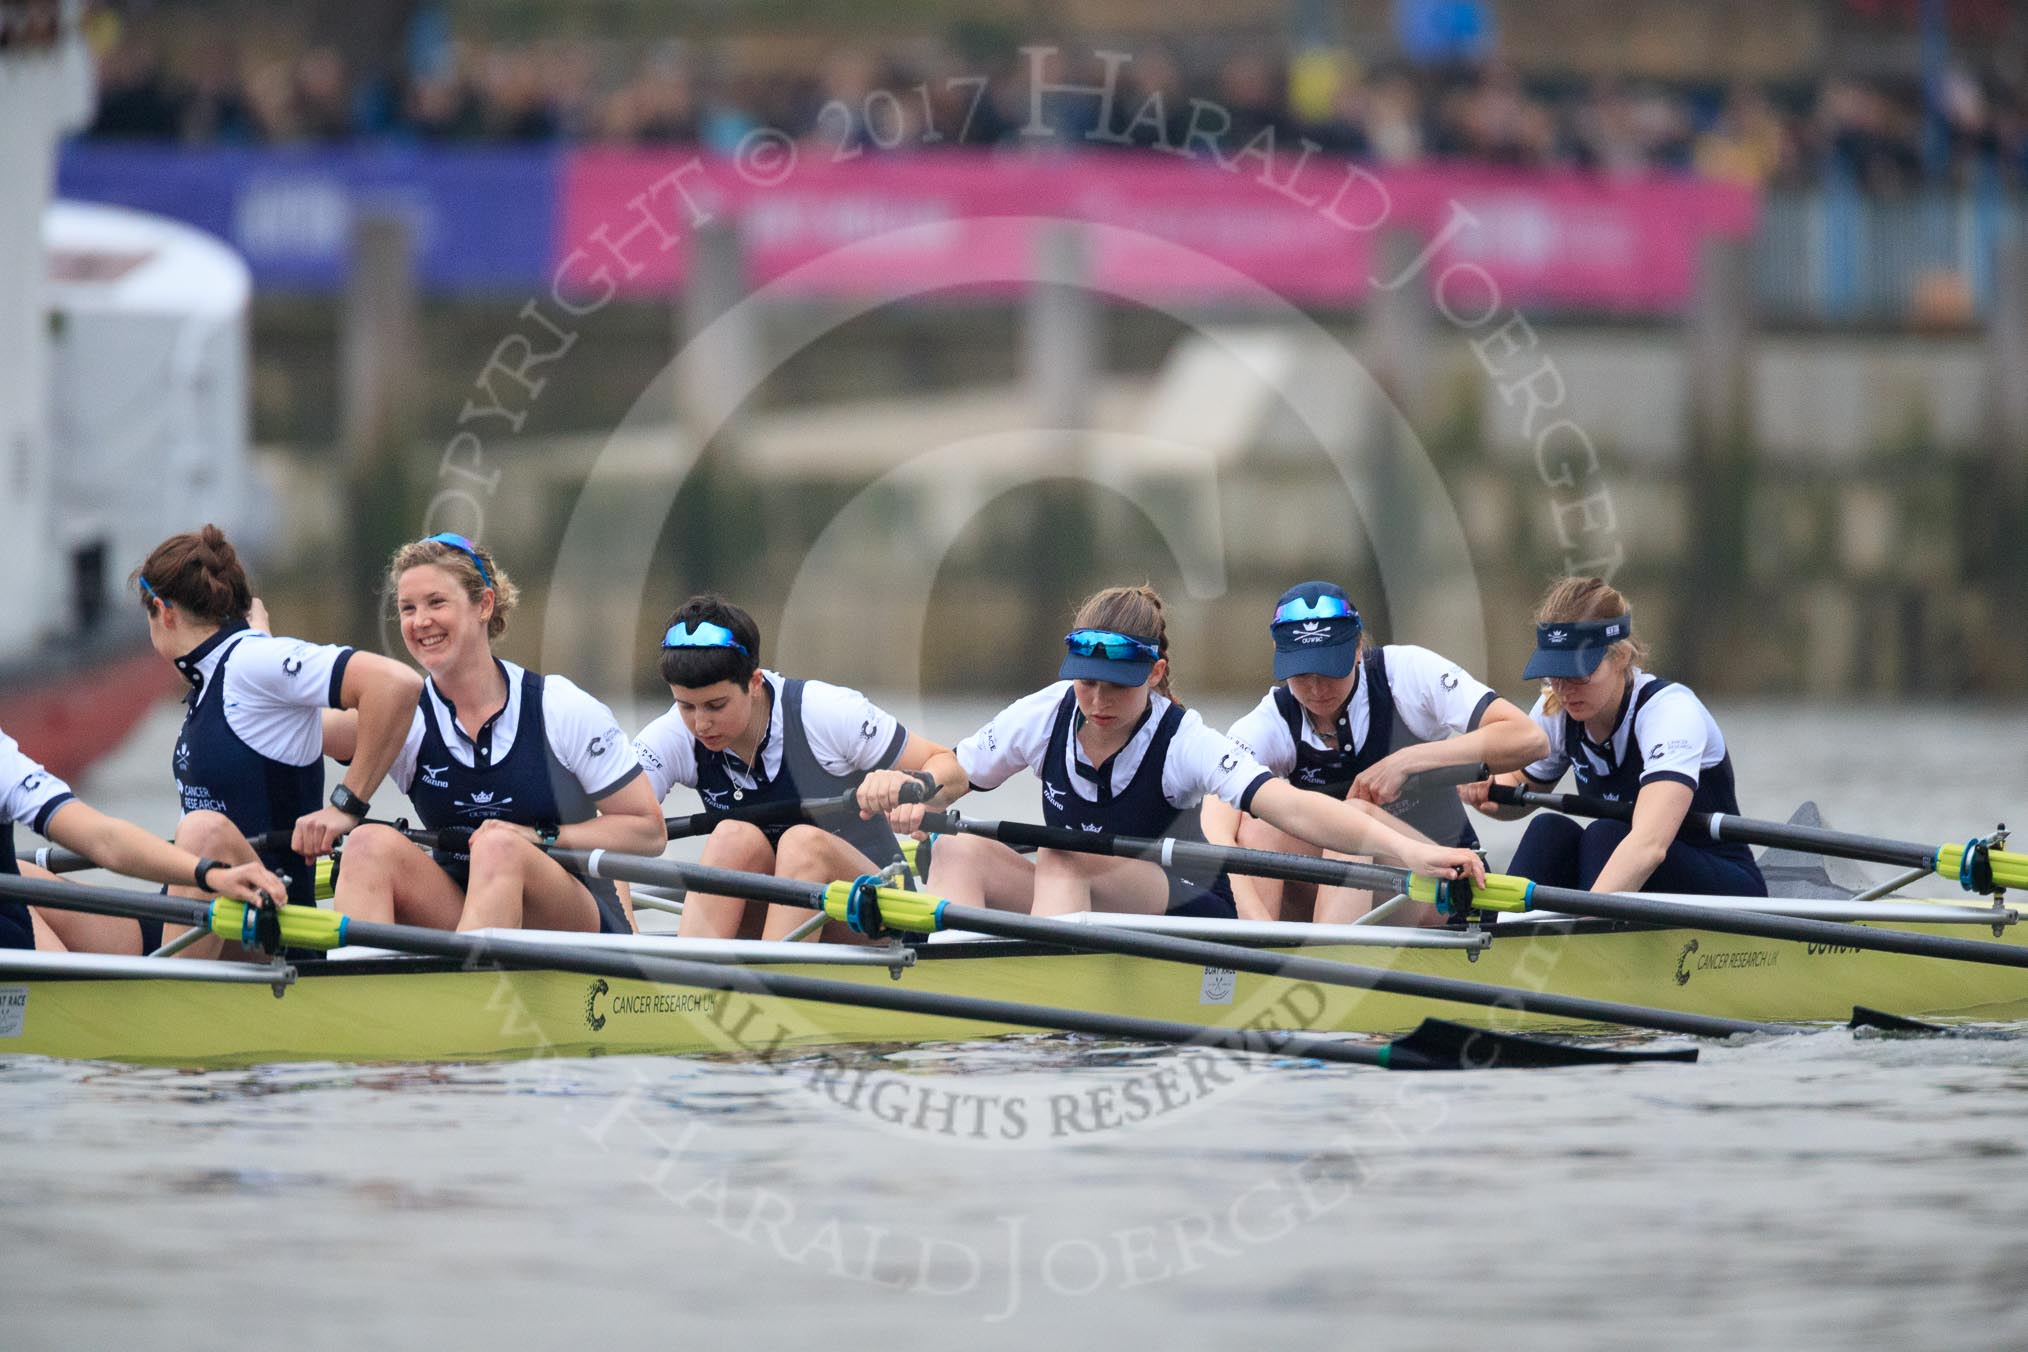 The Cancer Research UK Women's Boat Race 2018: The Oxford Blue Boat, getting ready for the start of the race - 6 Sara Kushma, 5 Morgan McGovern, 4 Alice Roberts, 3 Juliette Perry, 2 Katherine Erickson, bow Renée Koolschijn.
River Thames between Putney Bridge and Mortlake,
London SW15,

United Kingdom,
on 24 March 2018 at 16:28, image #156